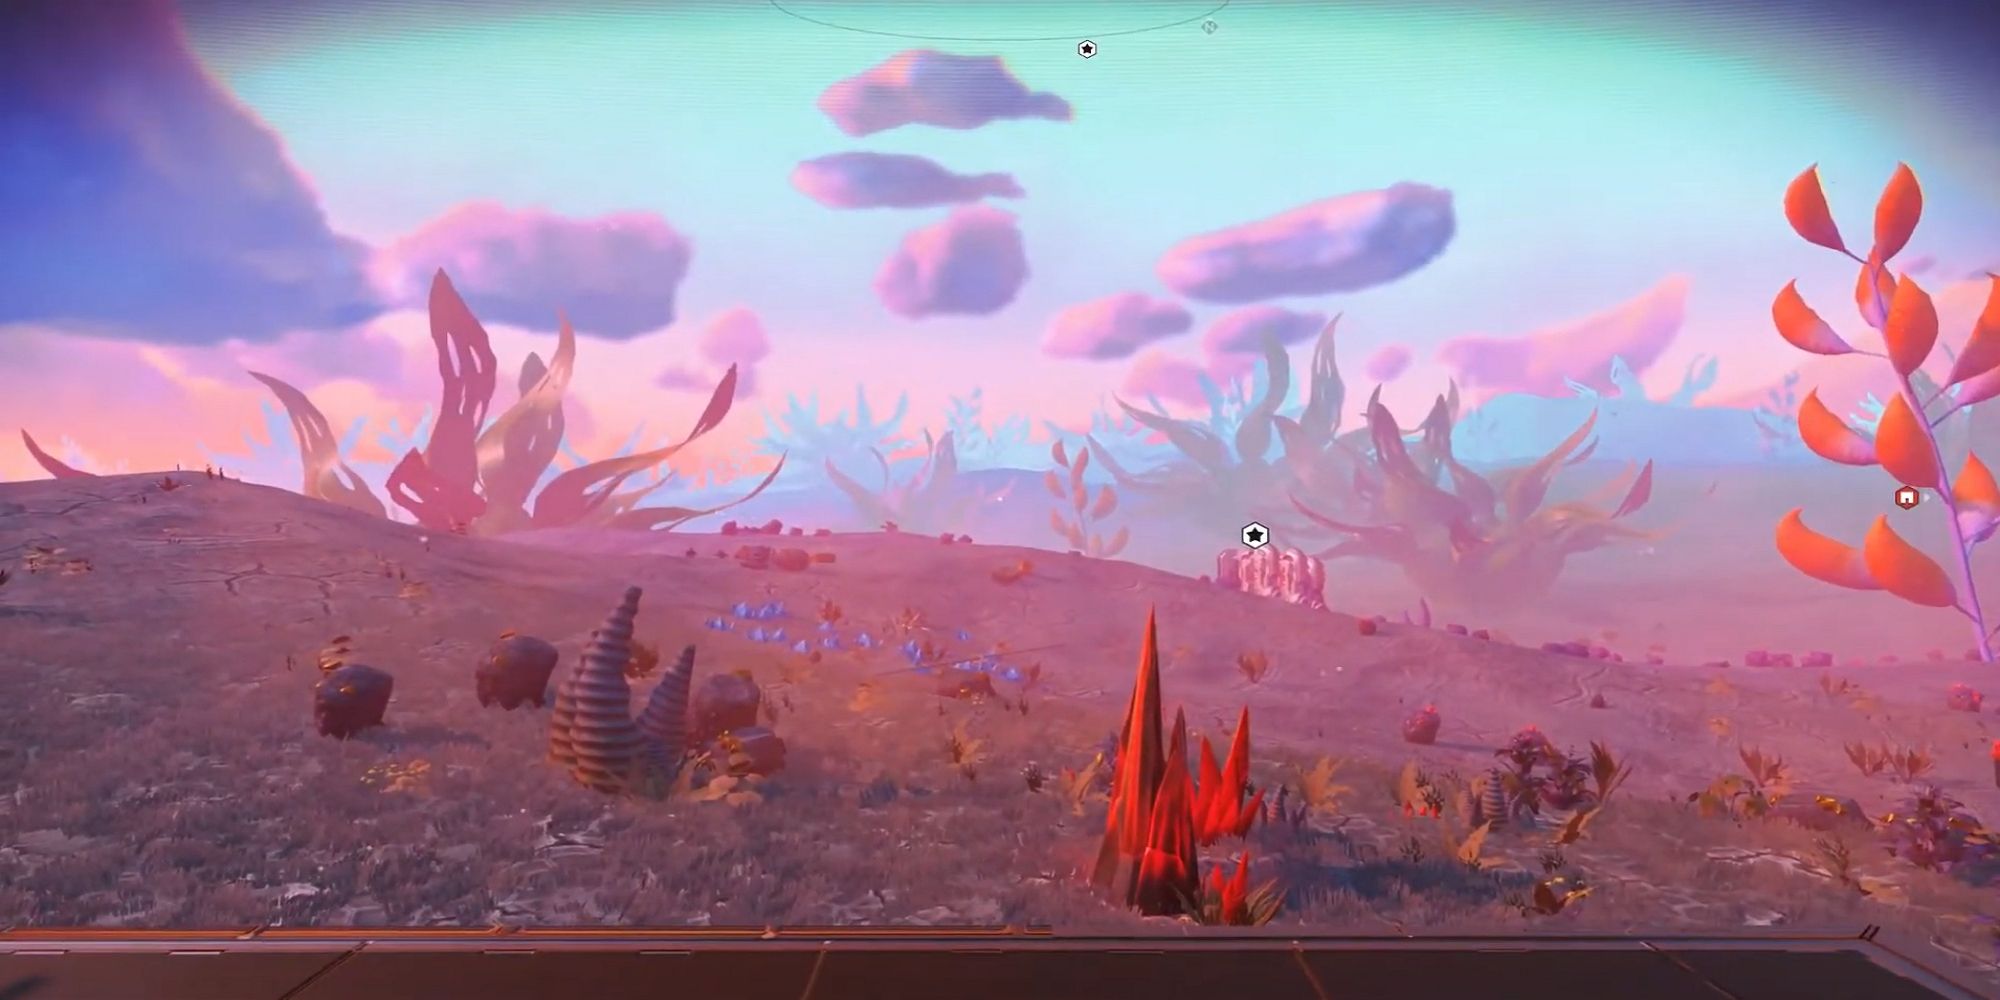 On a no man's sky planet in extreme survival mode